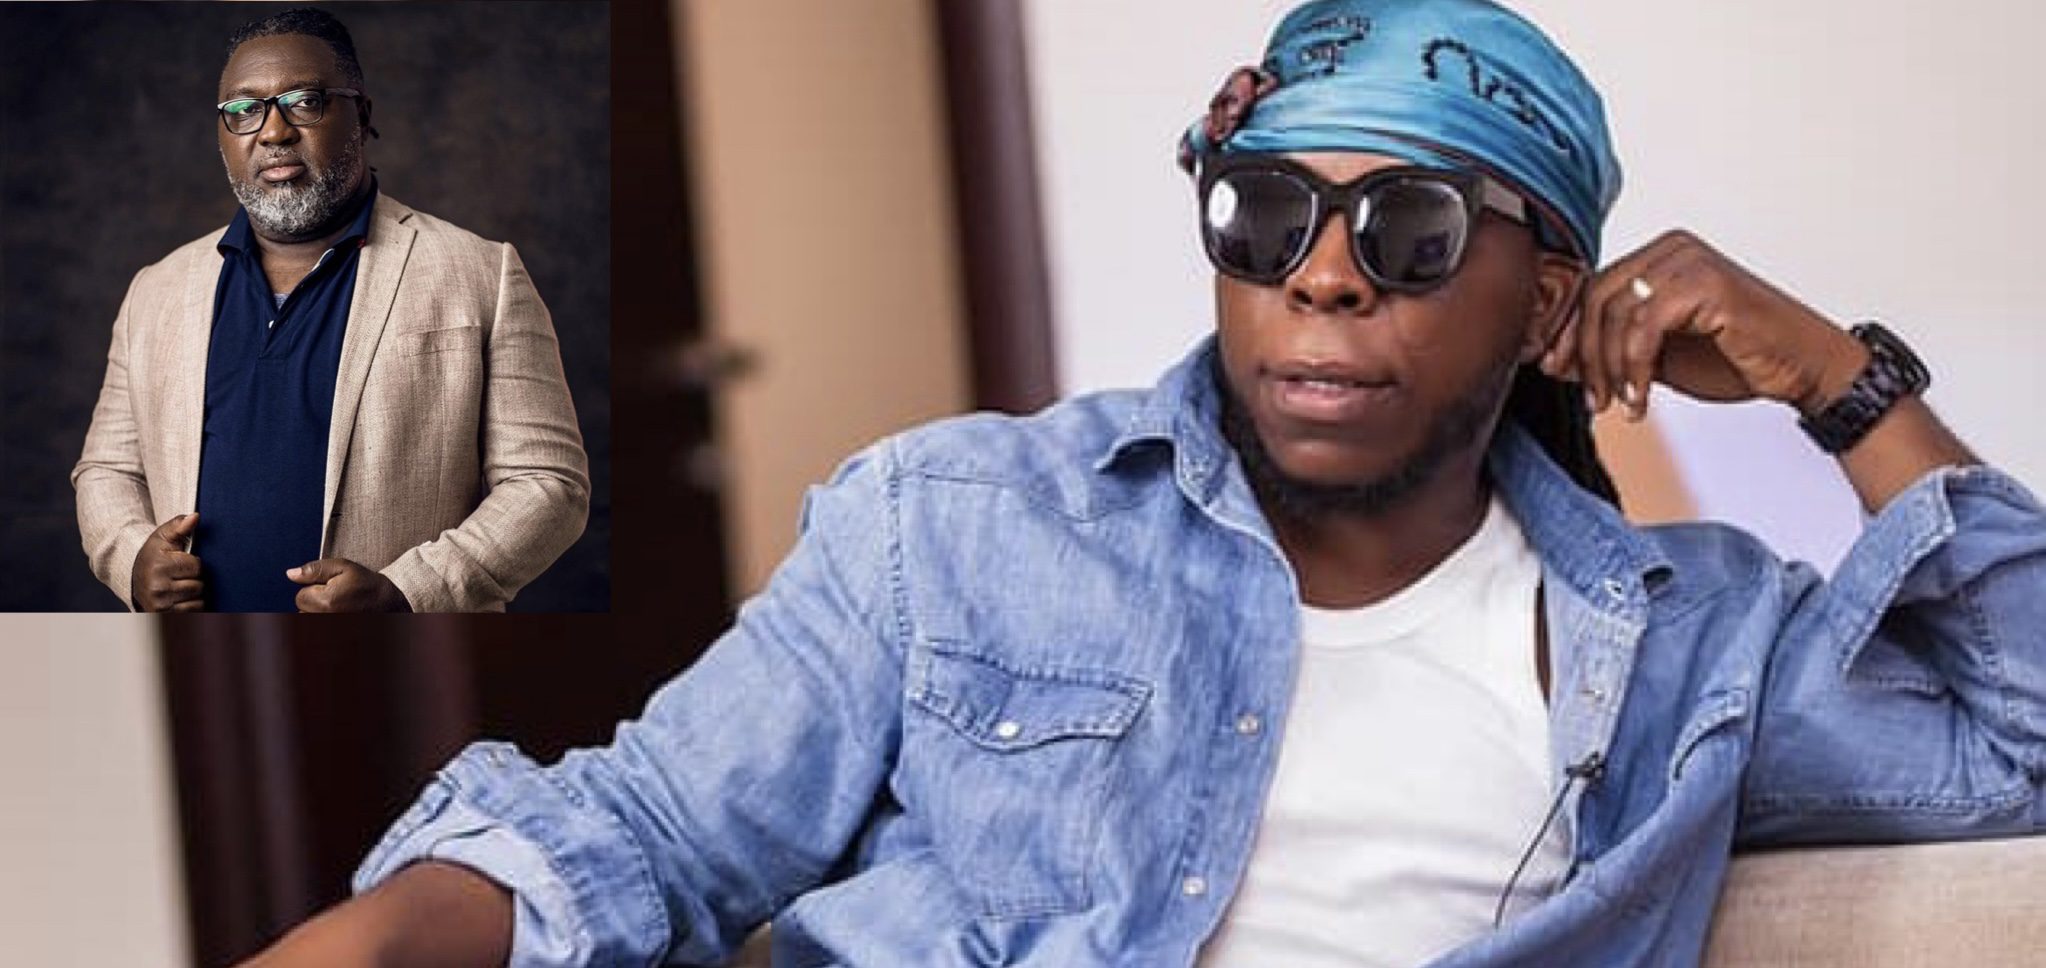 Edem is the most profitable artiste I’ve worked with” – Producer Hammer